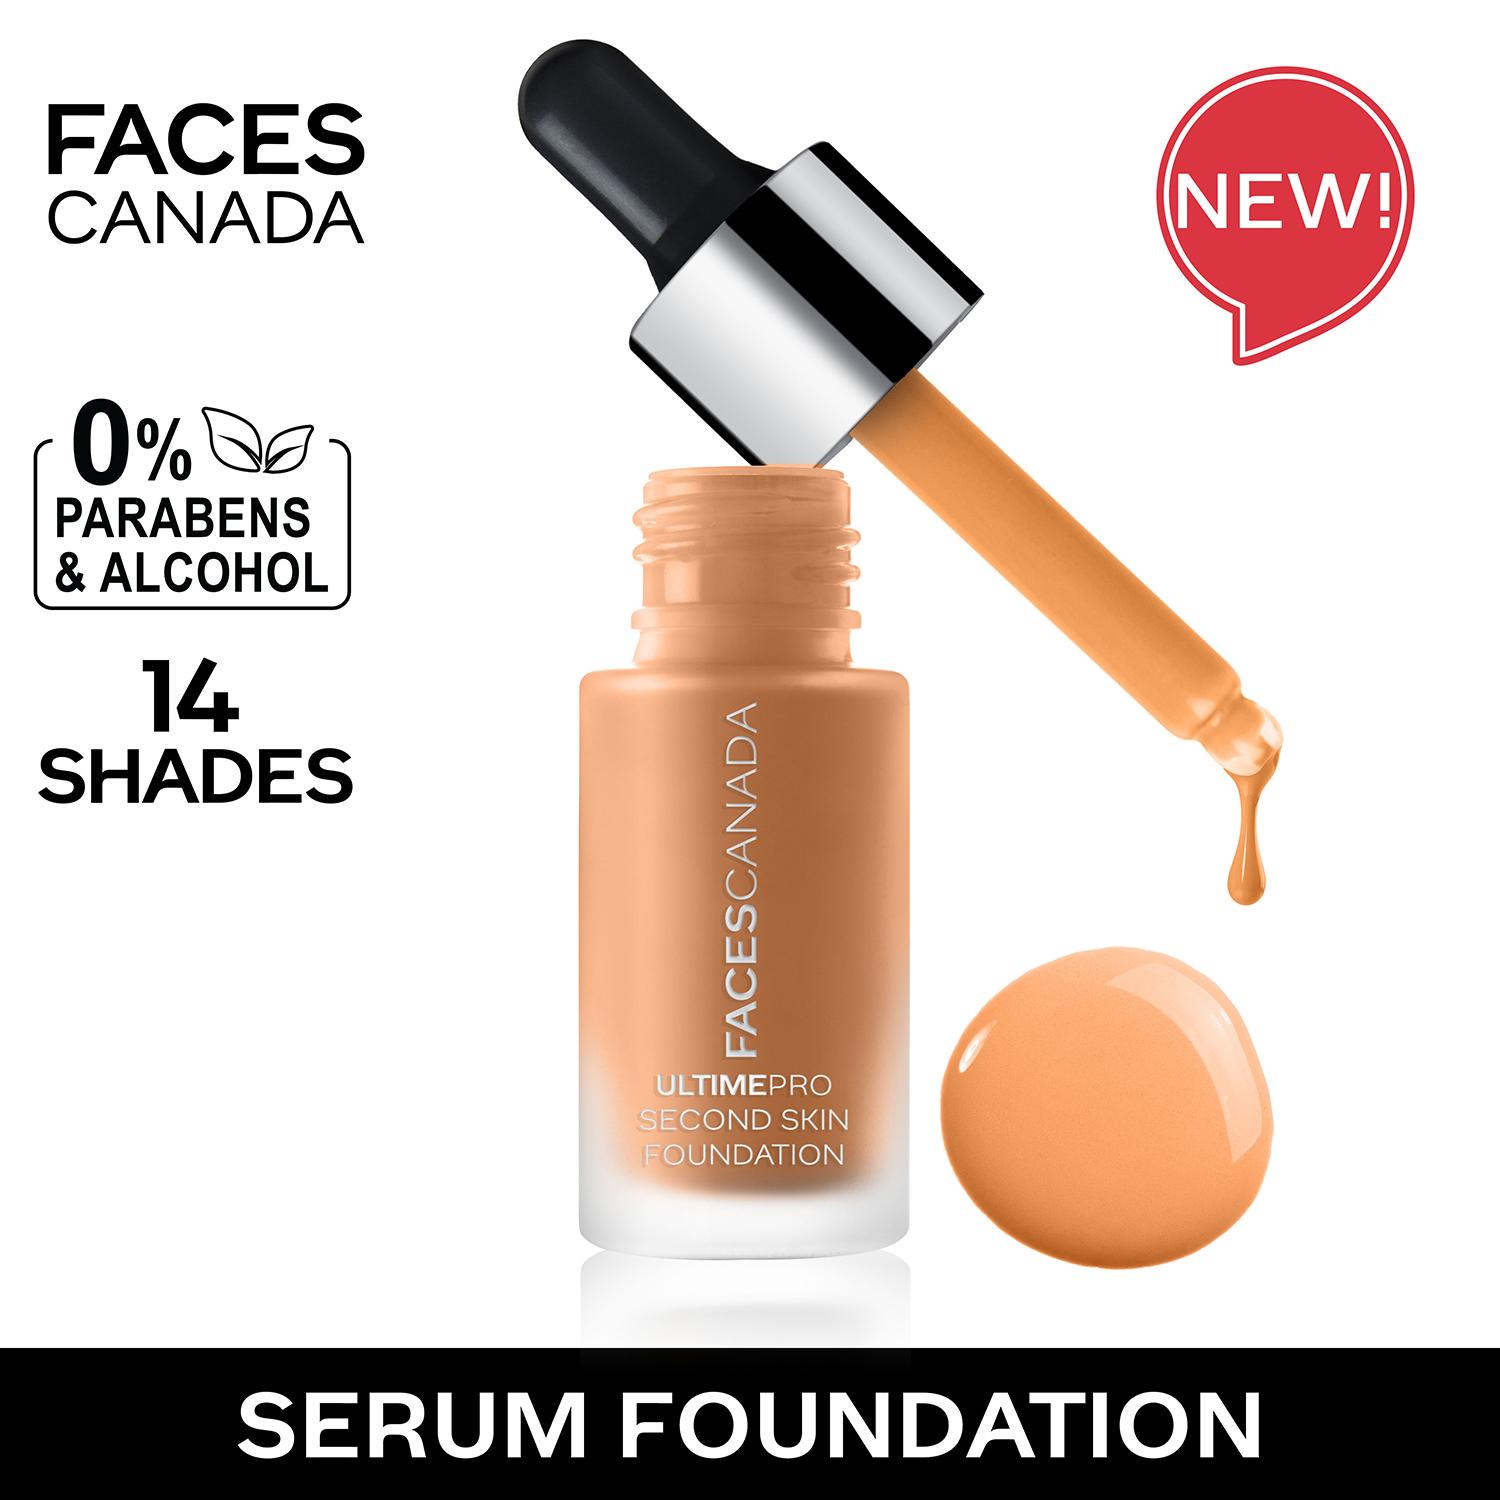 Faces Canada | Faces Canada Ultime Pro Second Skin Foundation - Beige 03, Matte Finish, SPF 15 (15 ml)